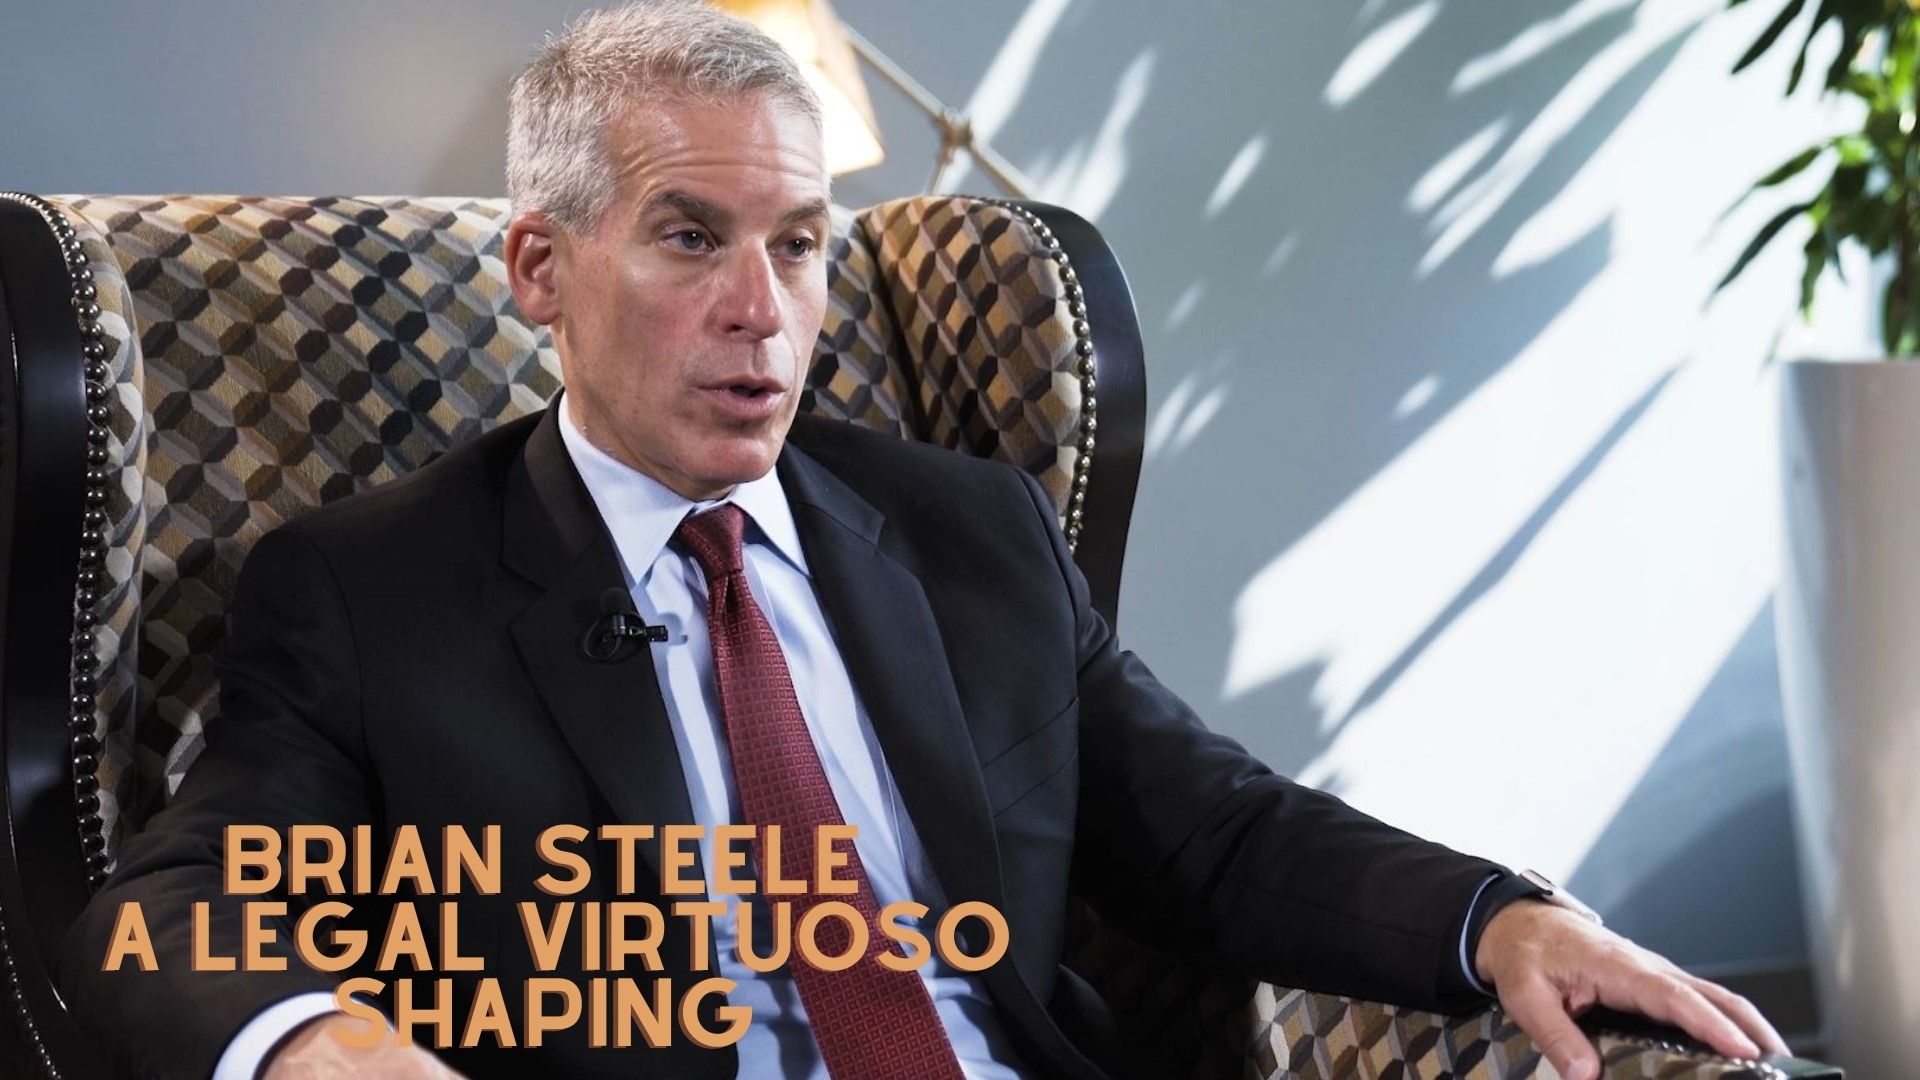 Brian Steele: A Legal Virtuoso Shaping the Boundaries of Legal Brilliance